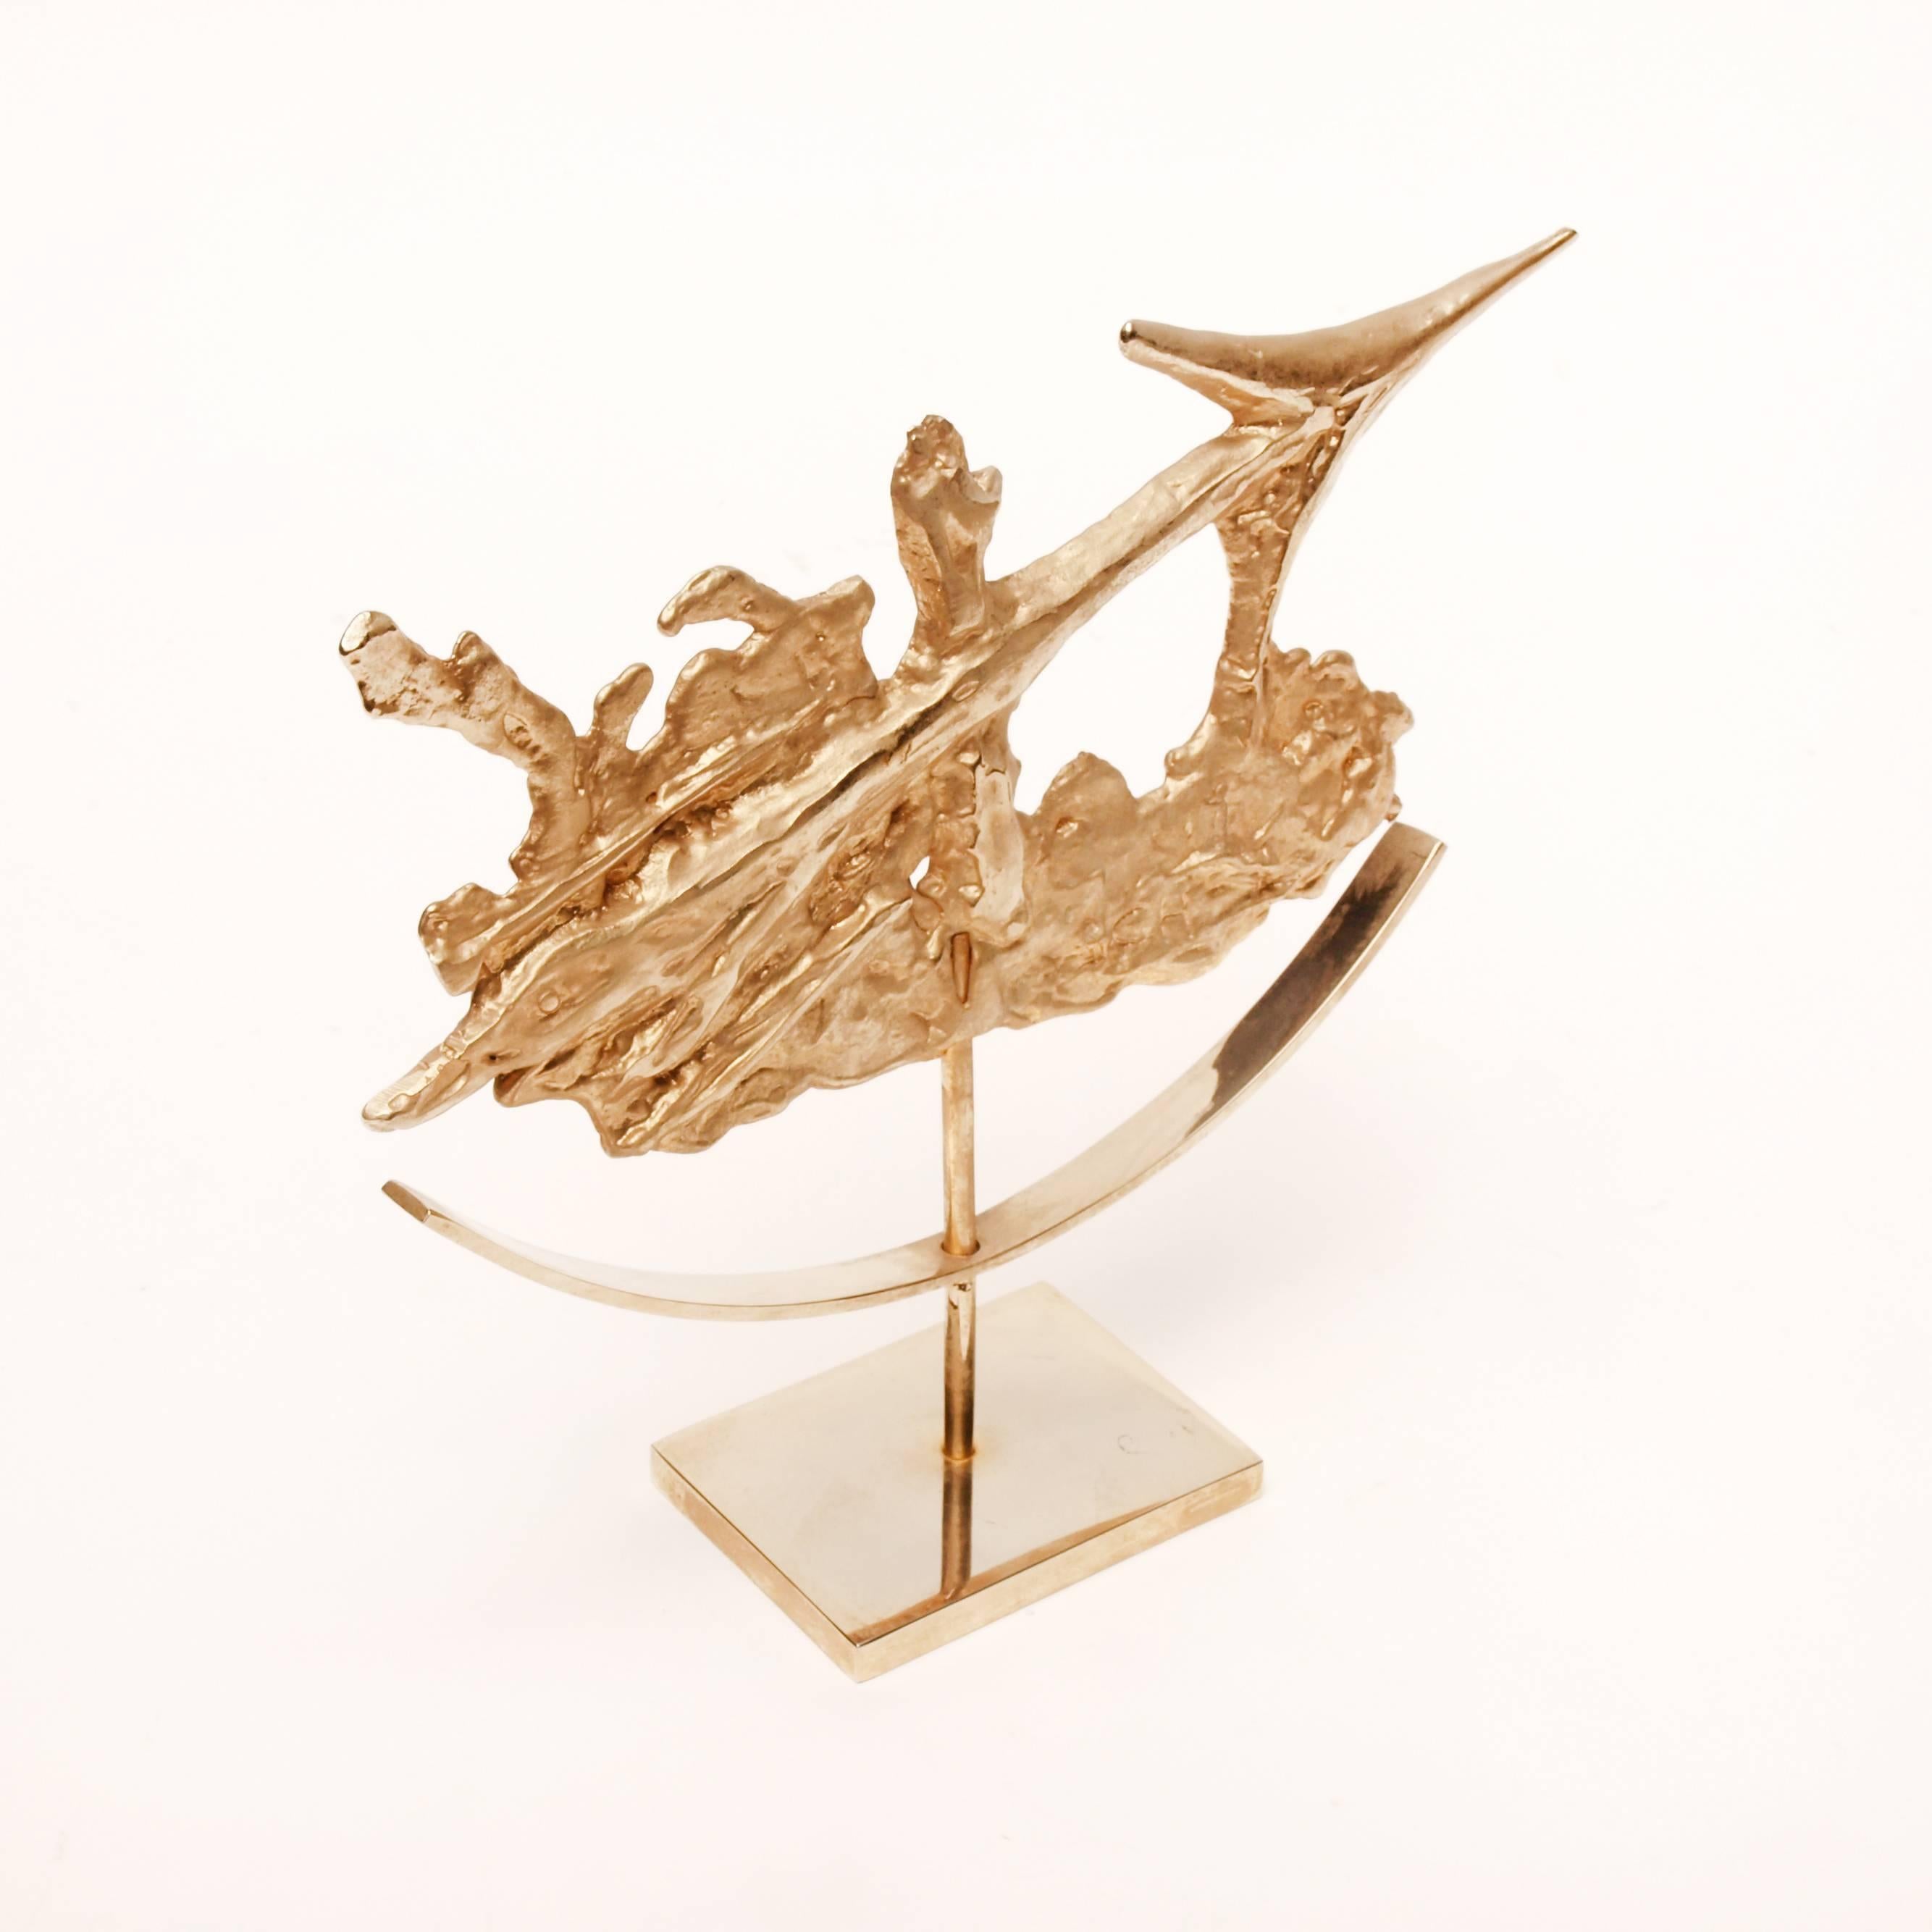 A gilded Sagittarius zodiac sculpture by Philippe Cheverny. The French designer is known for his ornamental pieces, sculptural lamps and furniture designed and manufactured throughout the 1950s-1970s. His works have since become sought after for